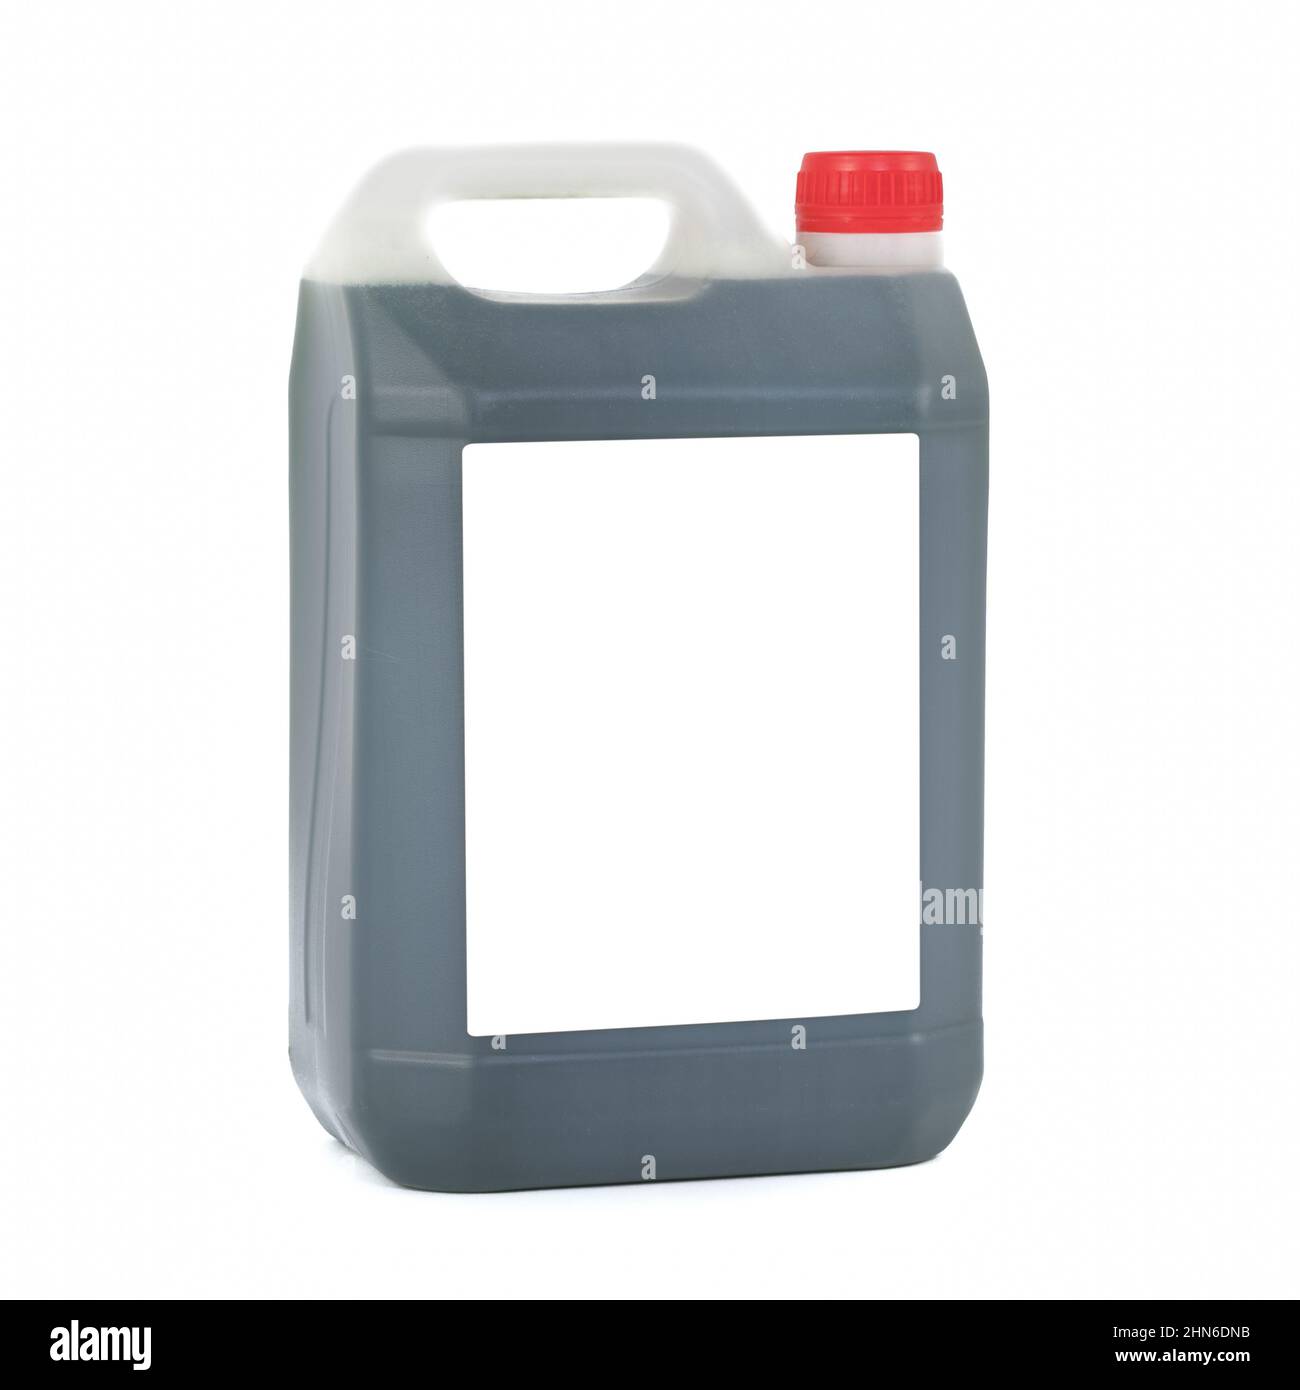 https://c8.alamy.com/comp/2HN6DNB/white-drum-with-red-cap-on-a-white-background-with-a-white-label-and-gray-liquid-2HN6DNB.jpg